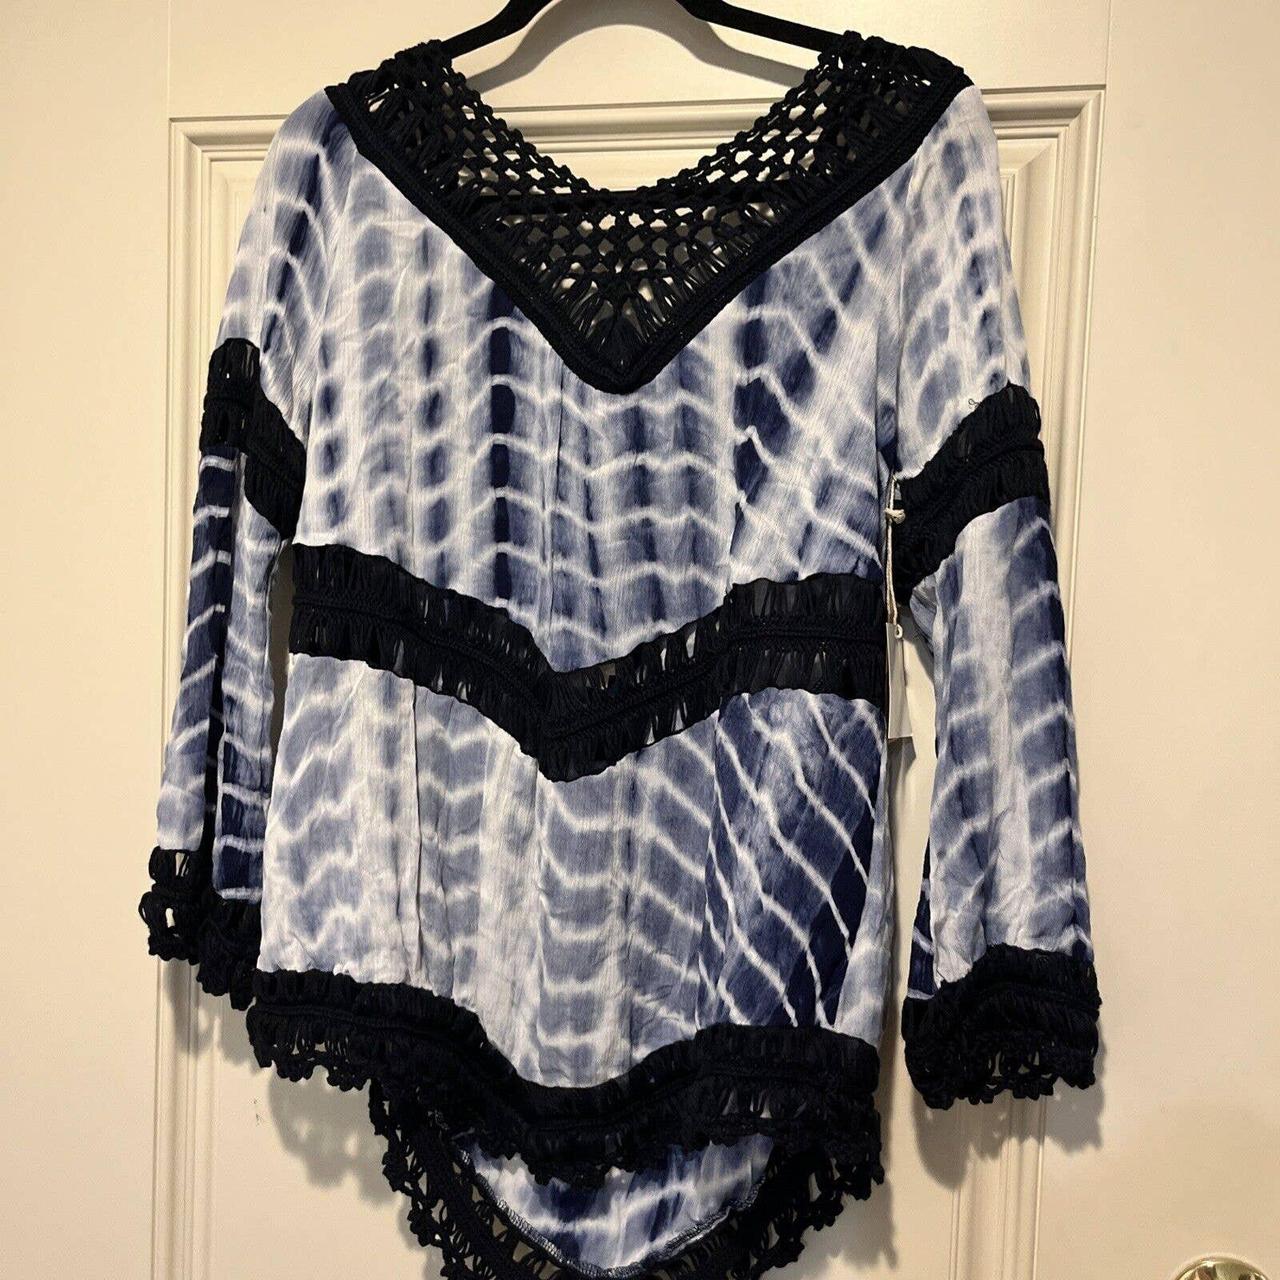 Surf Gypsy Women's Blue Cover-ups (6)